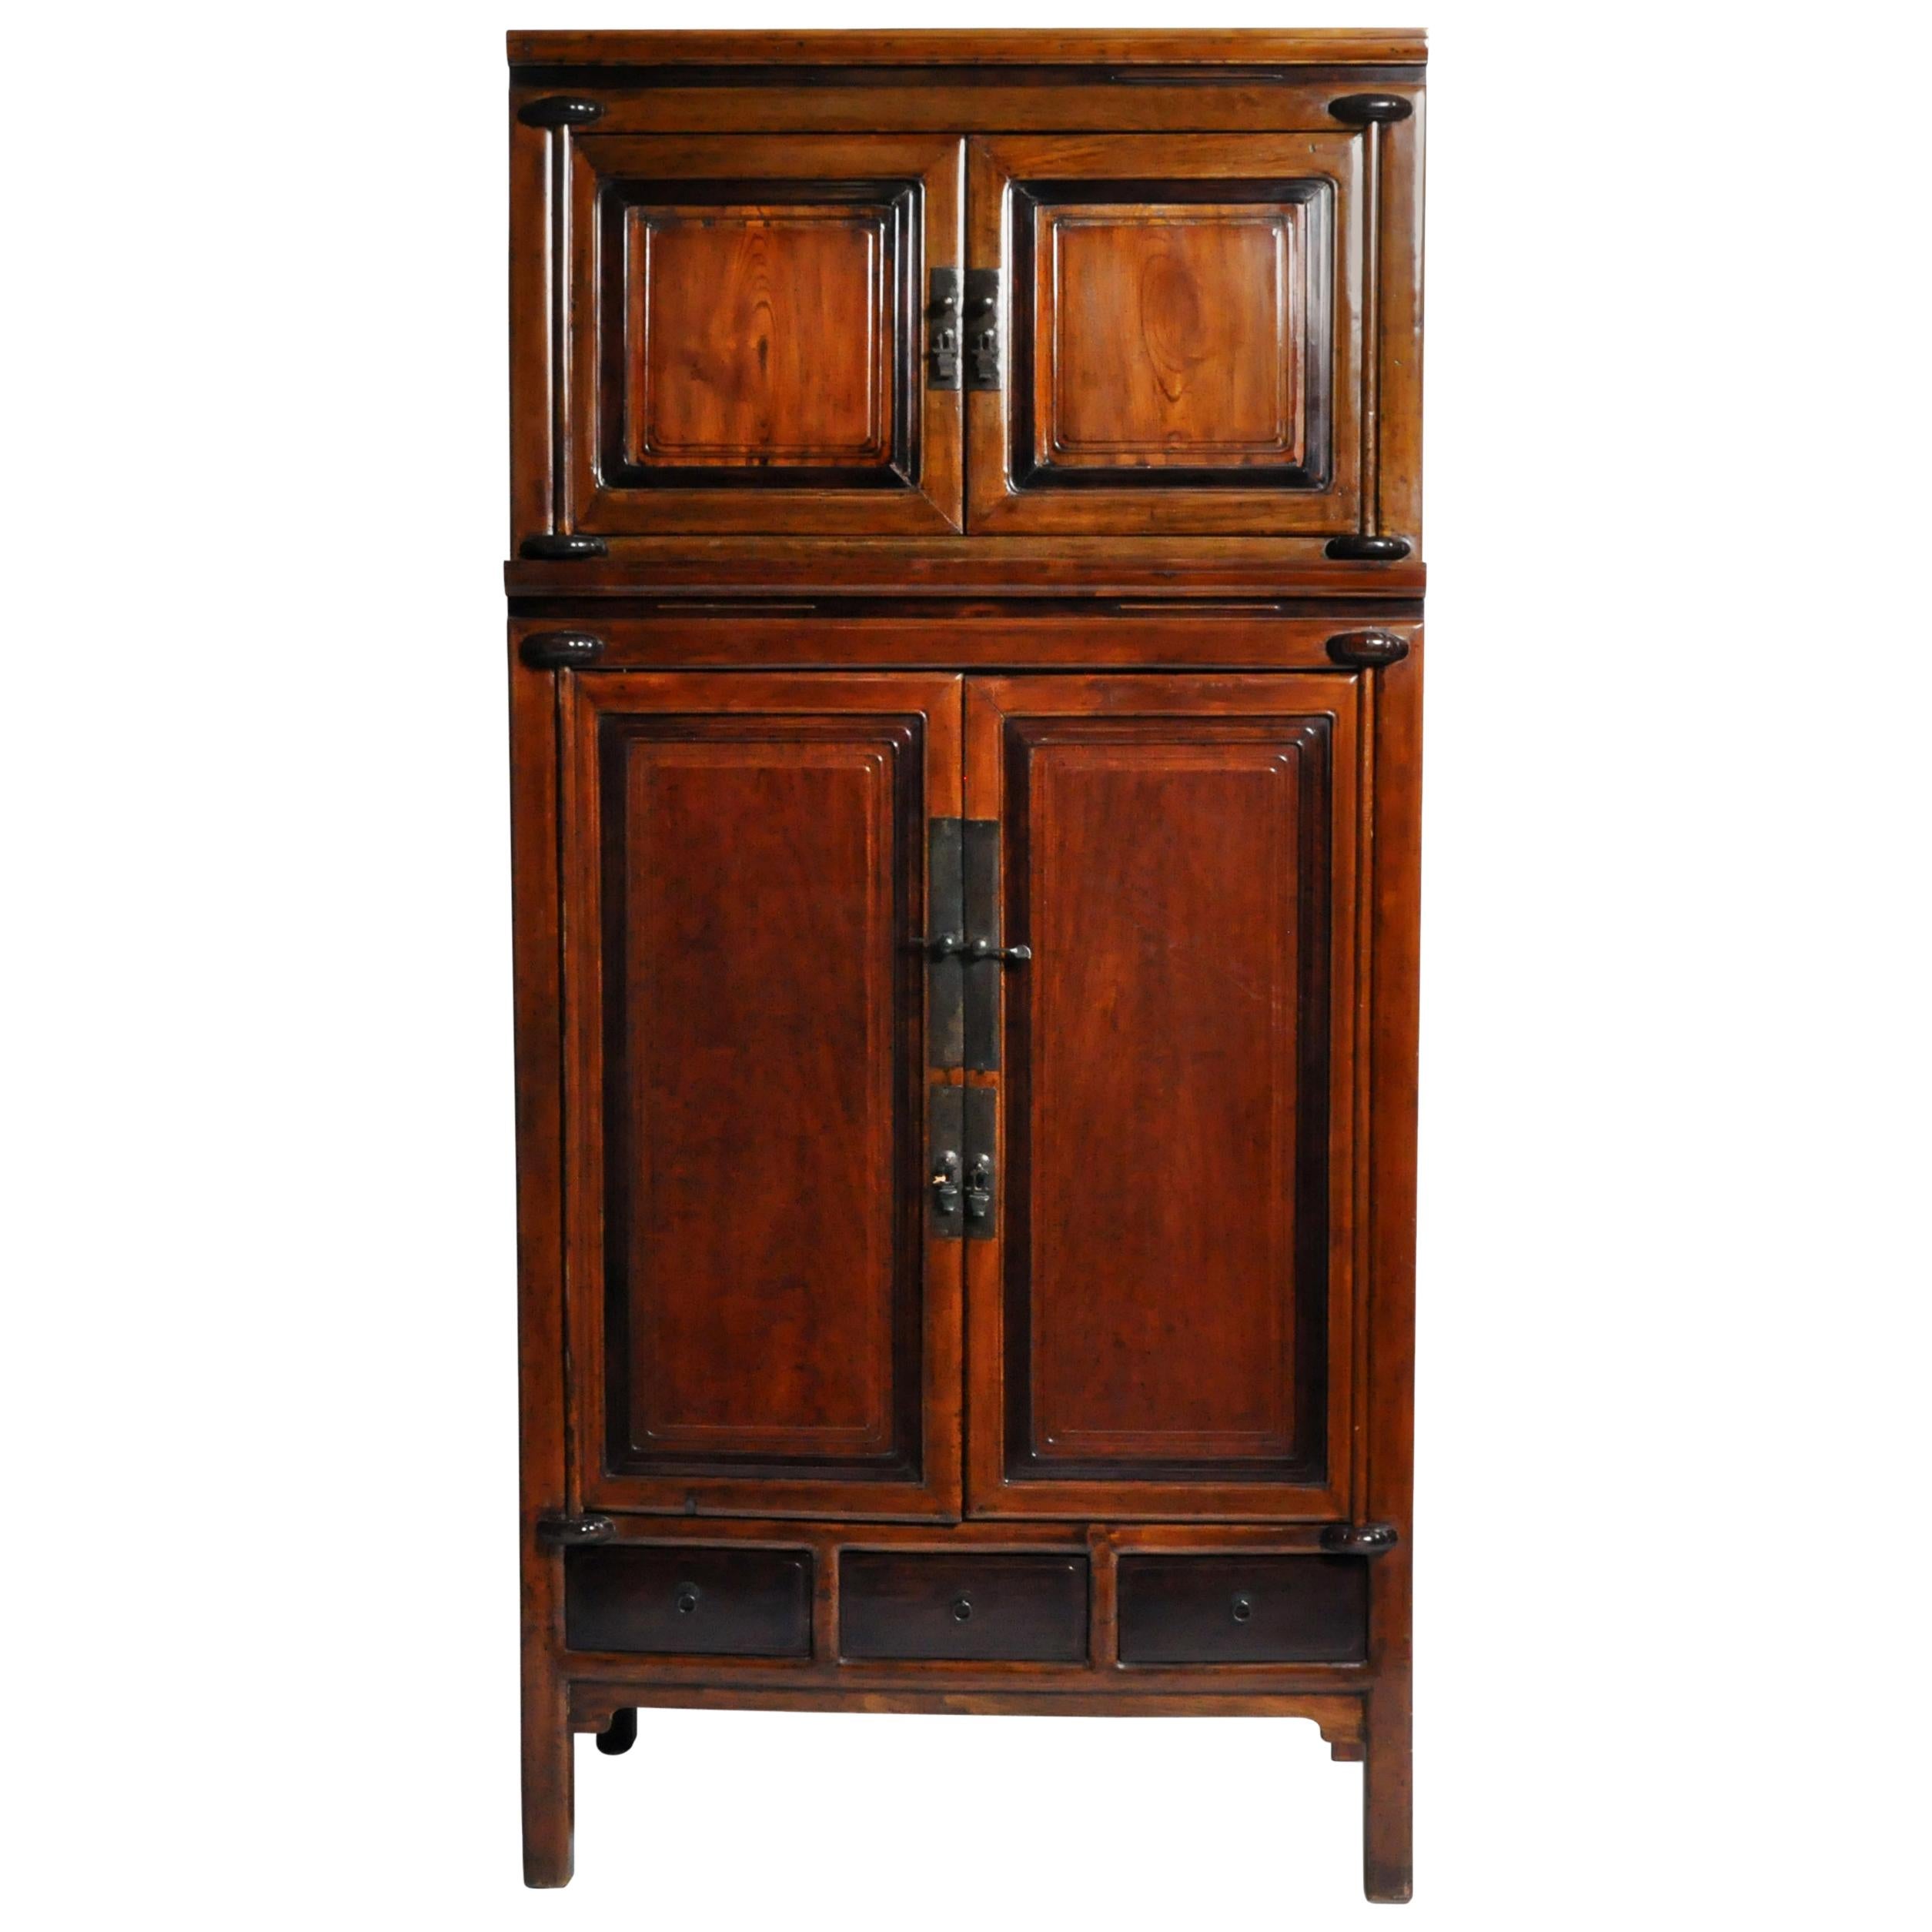 Impressive Two Section Cabinet with Five Drawers